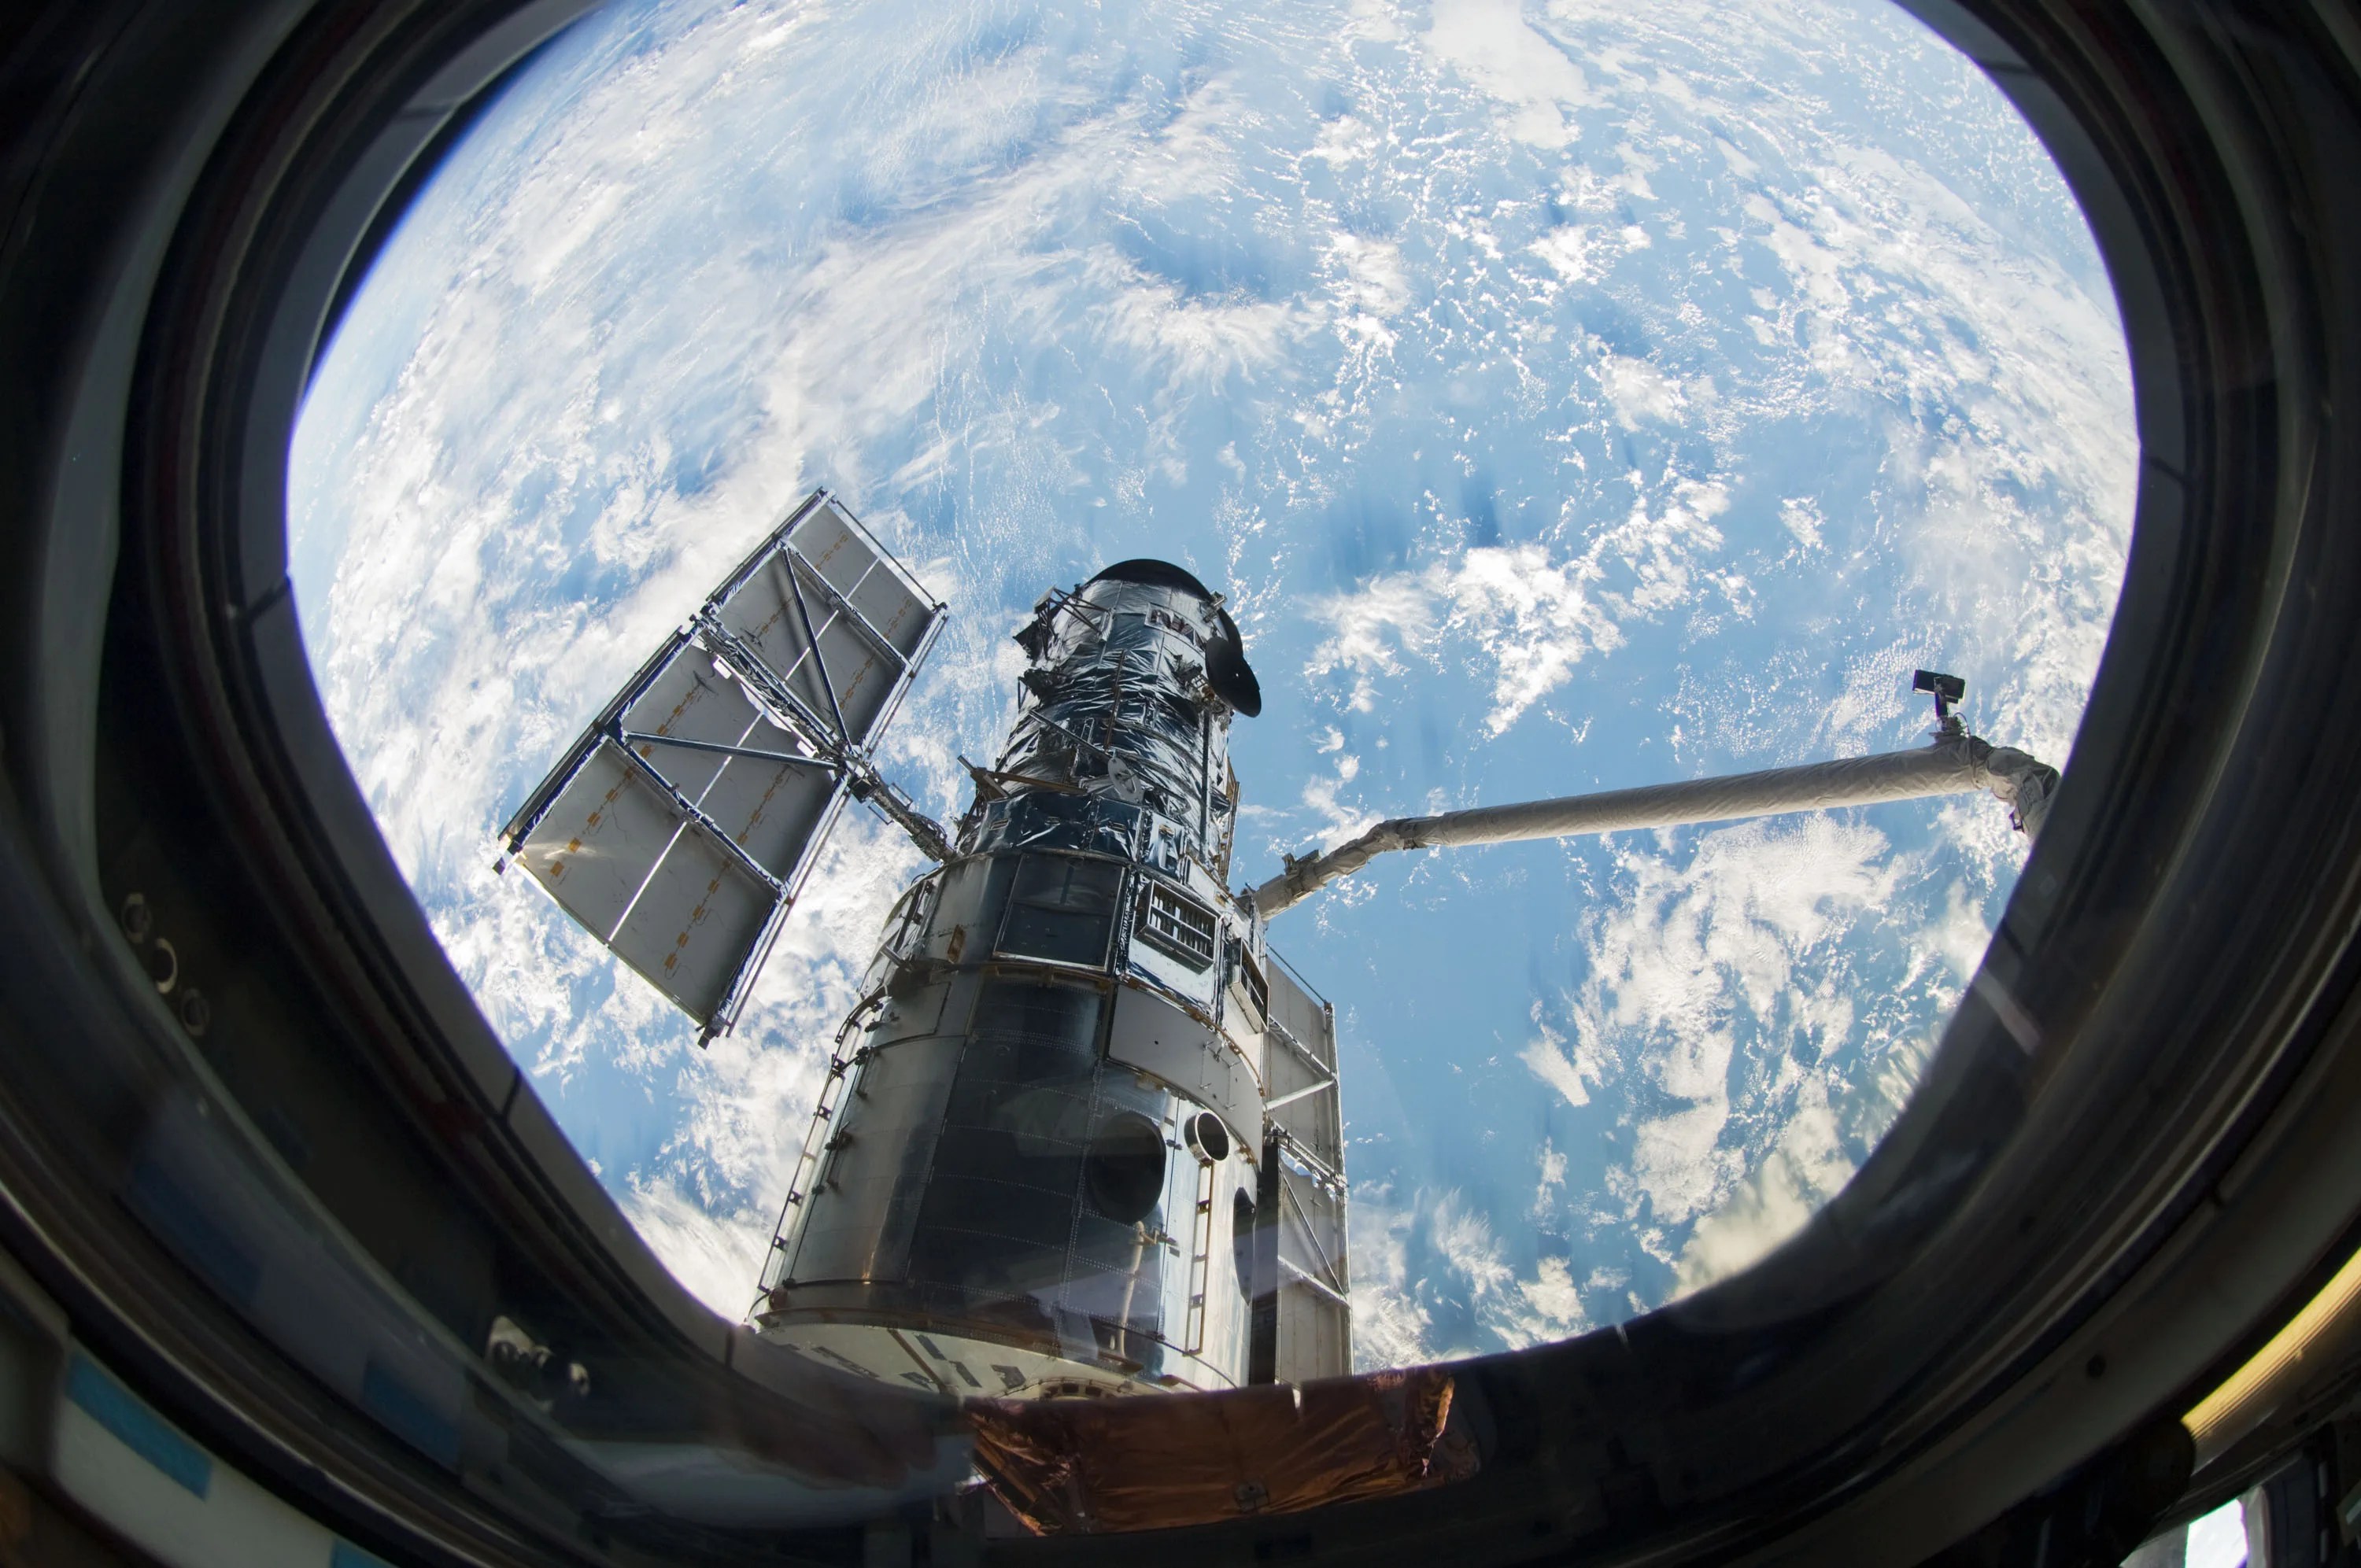 A window on the space shuttle Atlantis frames Hubble. One of Hubble's solar panels and the shuttle's robotic arm are visible through the window, and a blue, cloud-covered Earth fills the background behind the telescope.